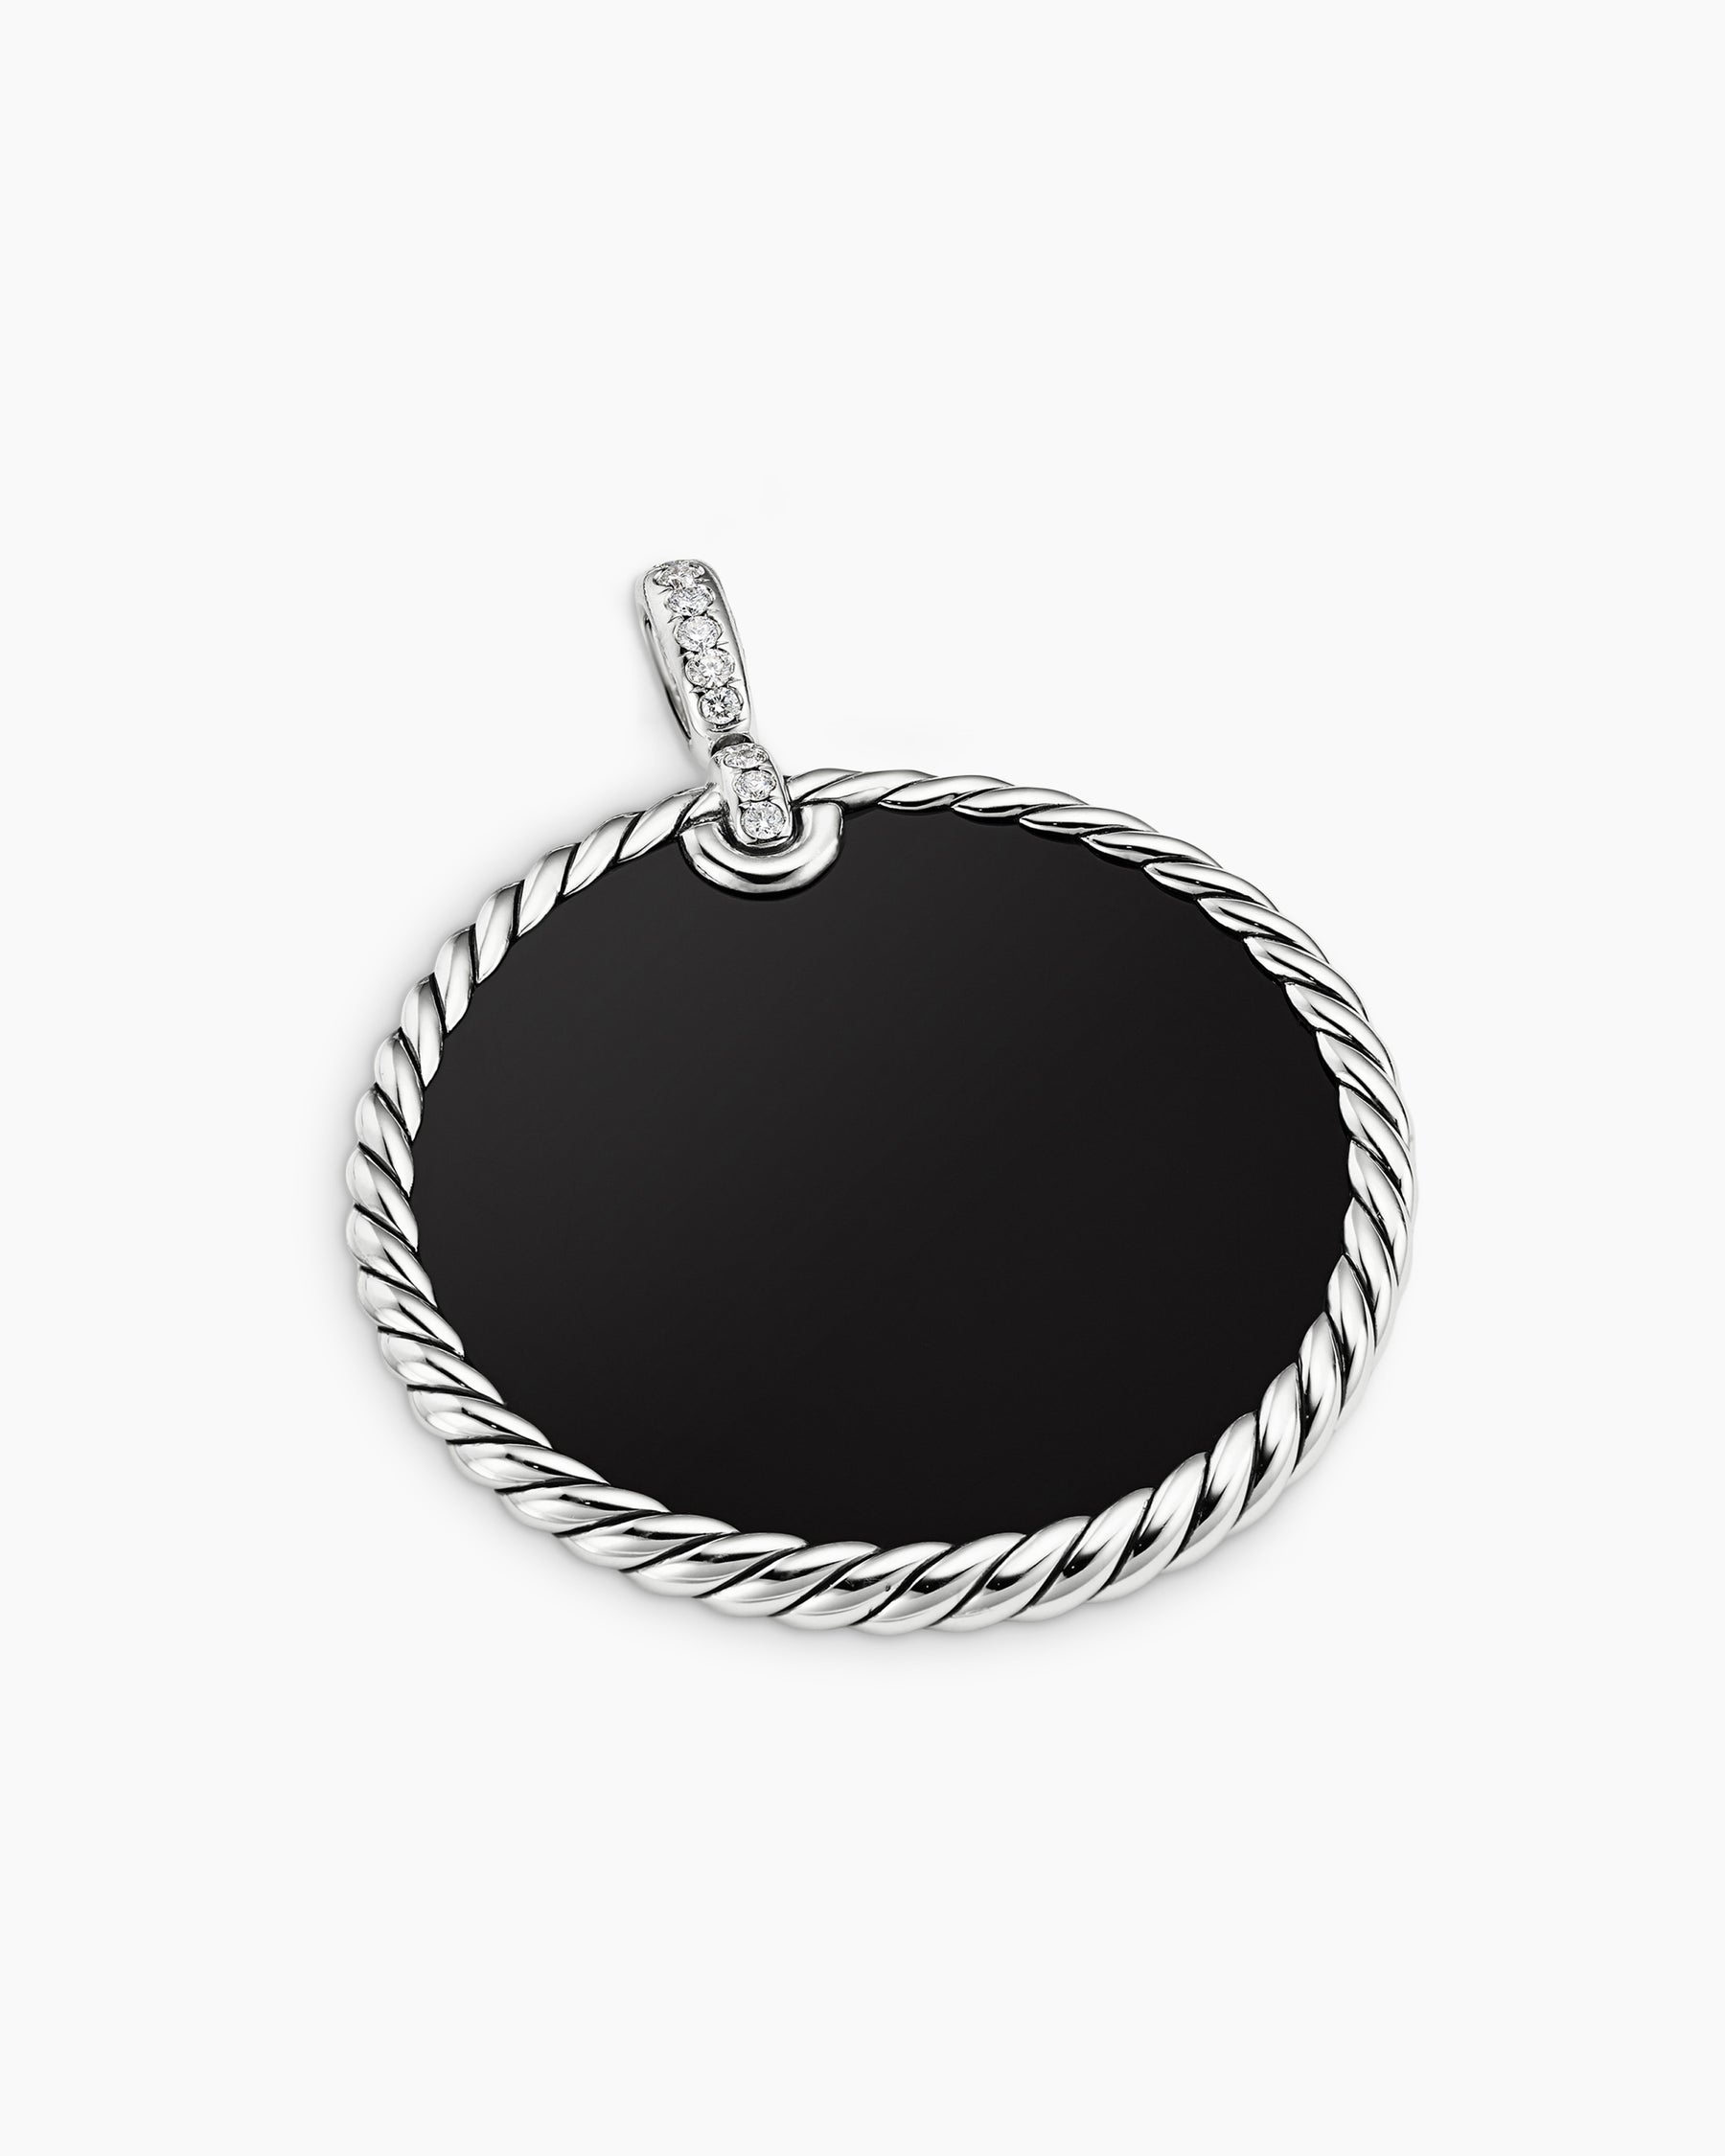 David Yurman DY Elements Eclipse Pendant Necklace with Black Onyx Reversible to Mother of Pearl, 18K Yellow Gold and Pavé Diamonds